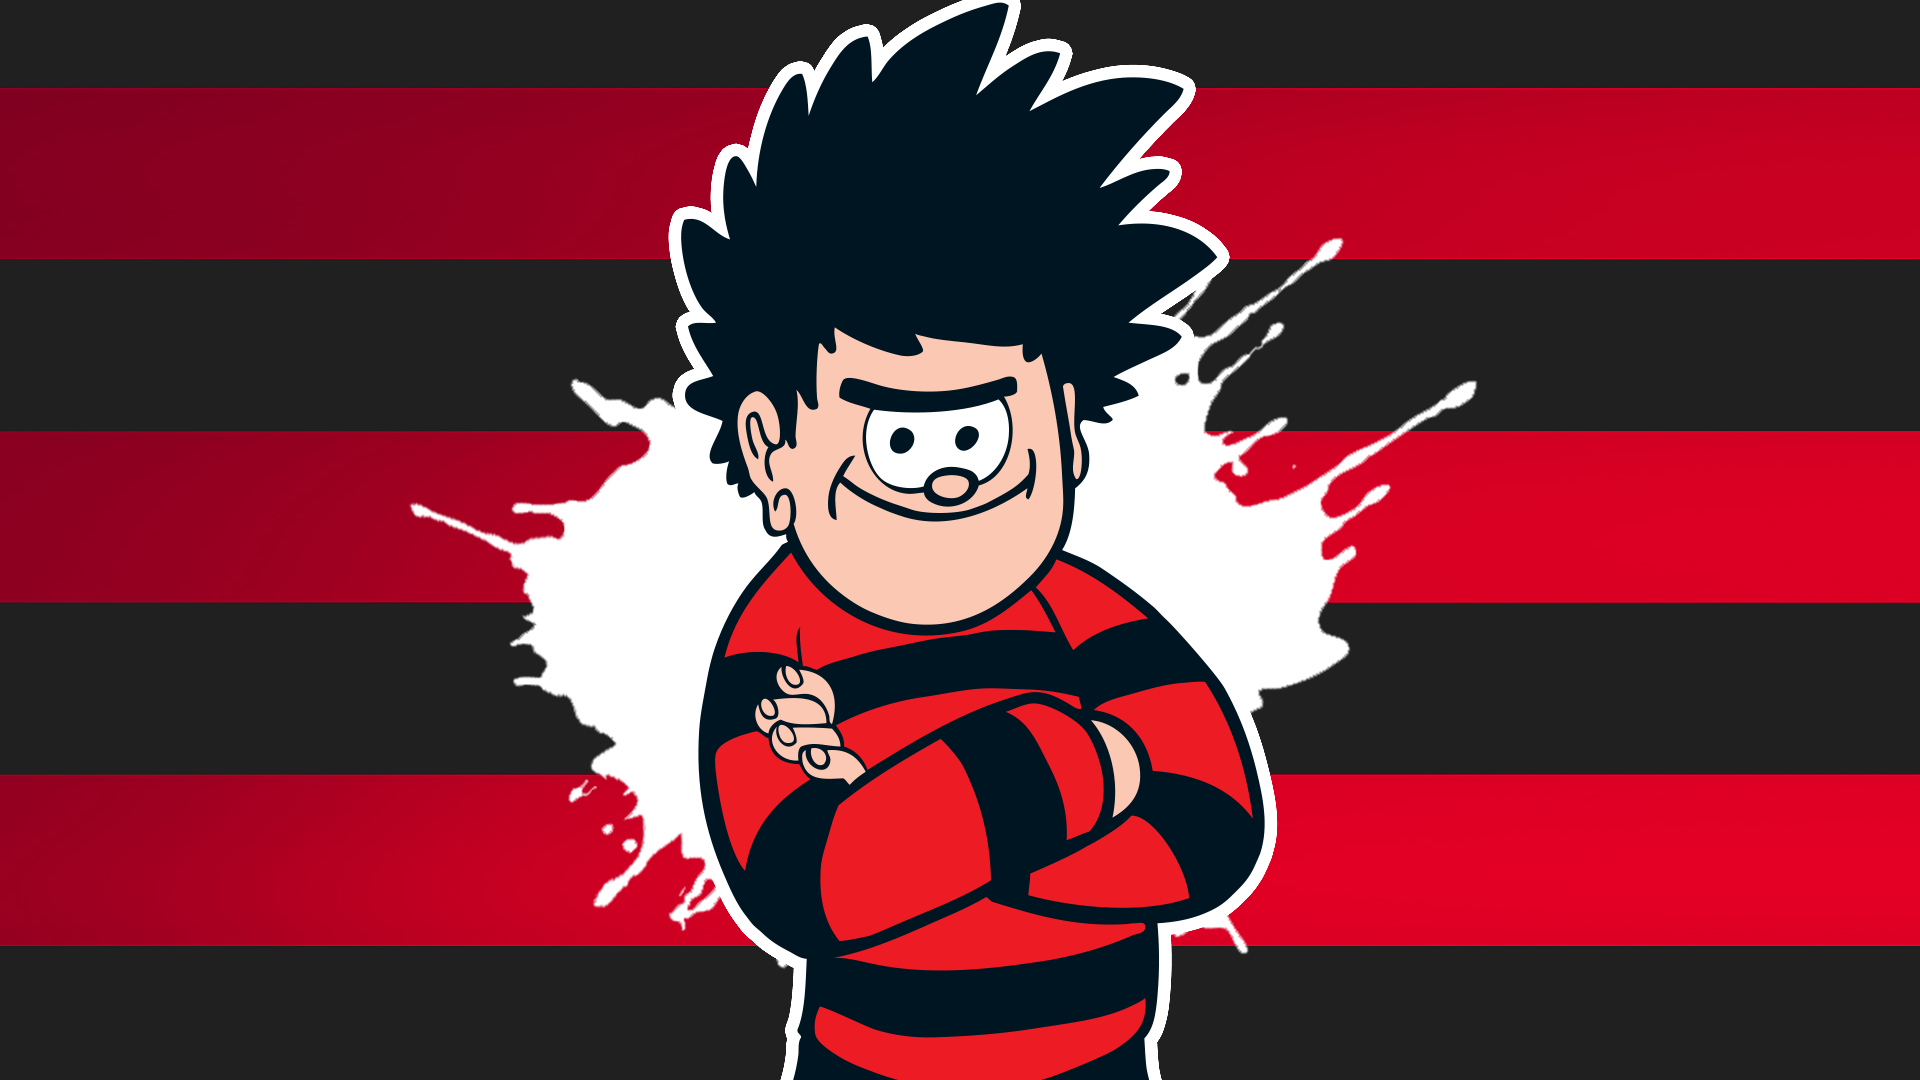 Dennis standing in front of a red and black striped background